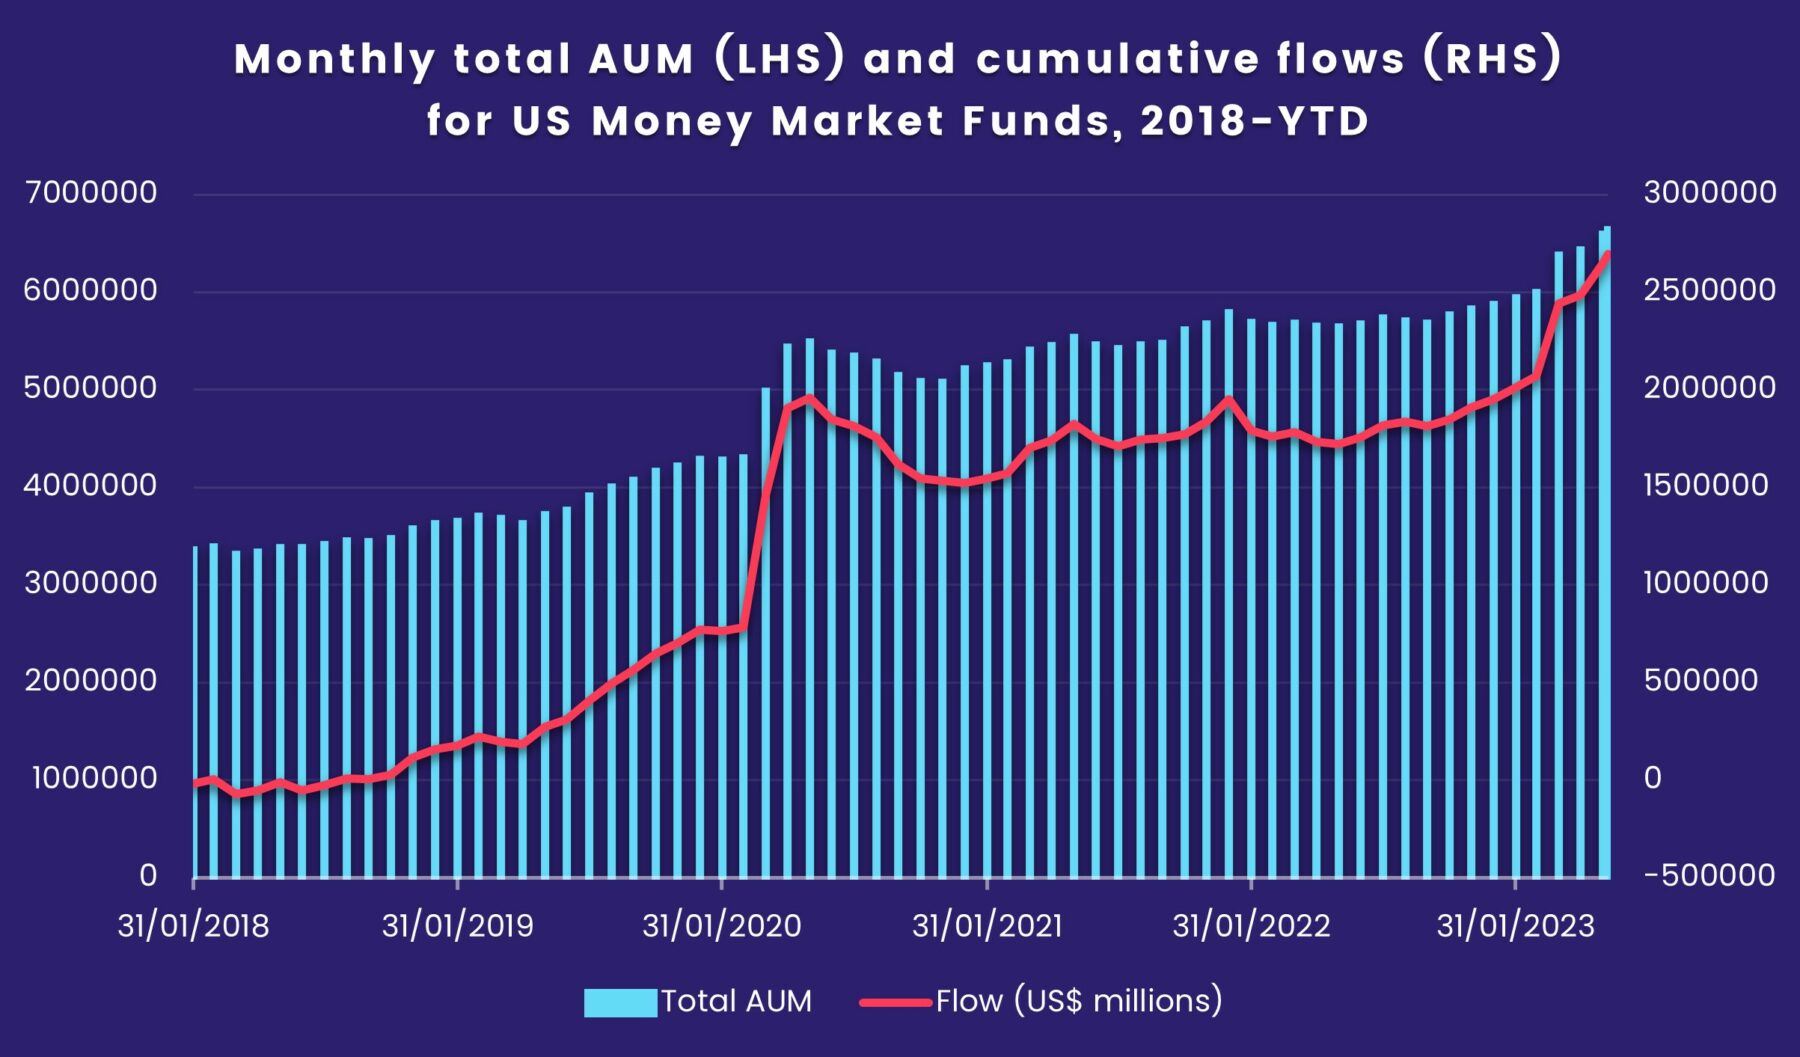 Image of a chart representing "Monthly total AUM (LHS) and cumulative flows (RHS) for Money Market Funds, 2018-YTD"